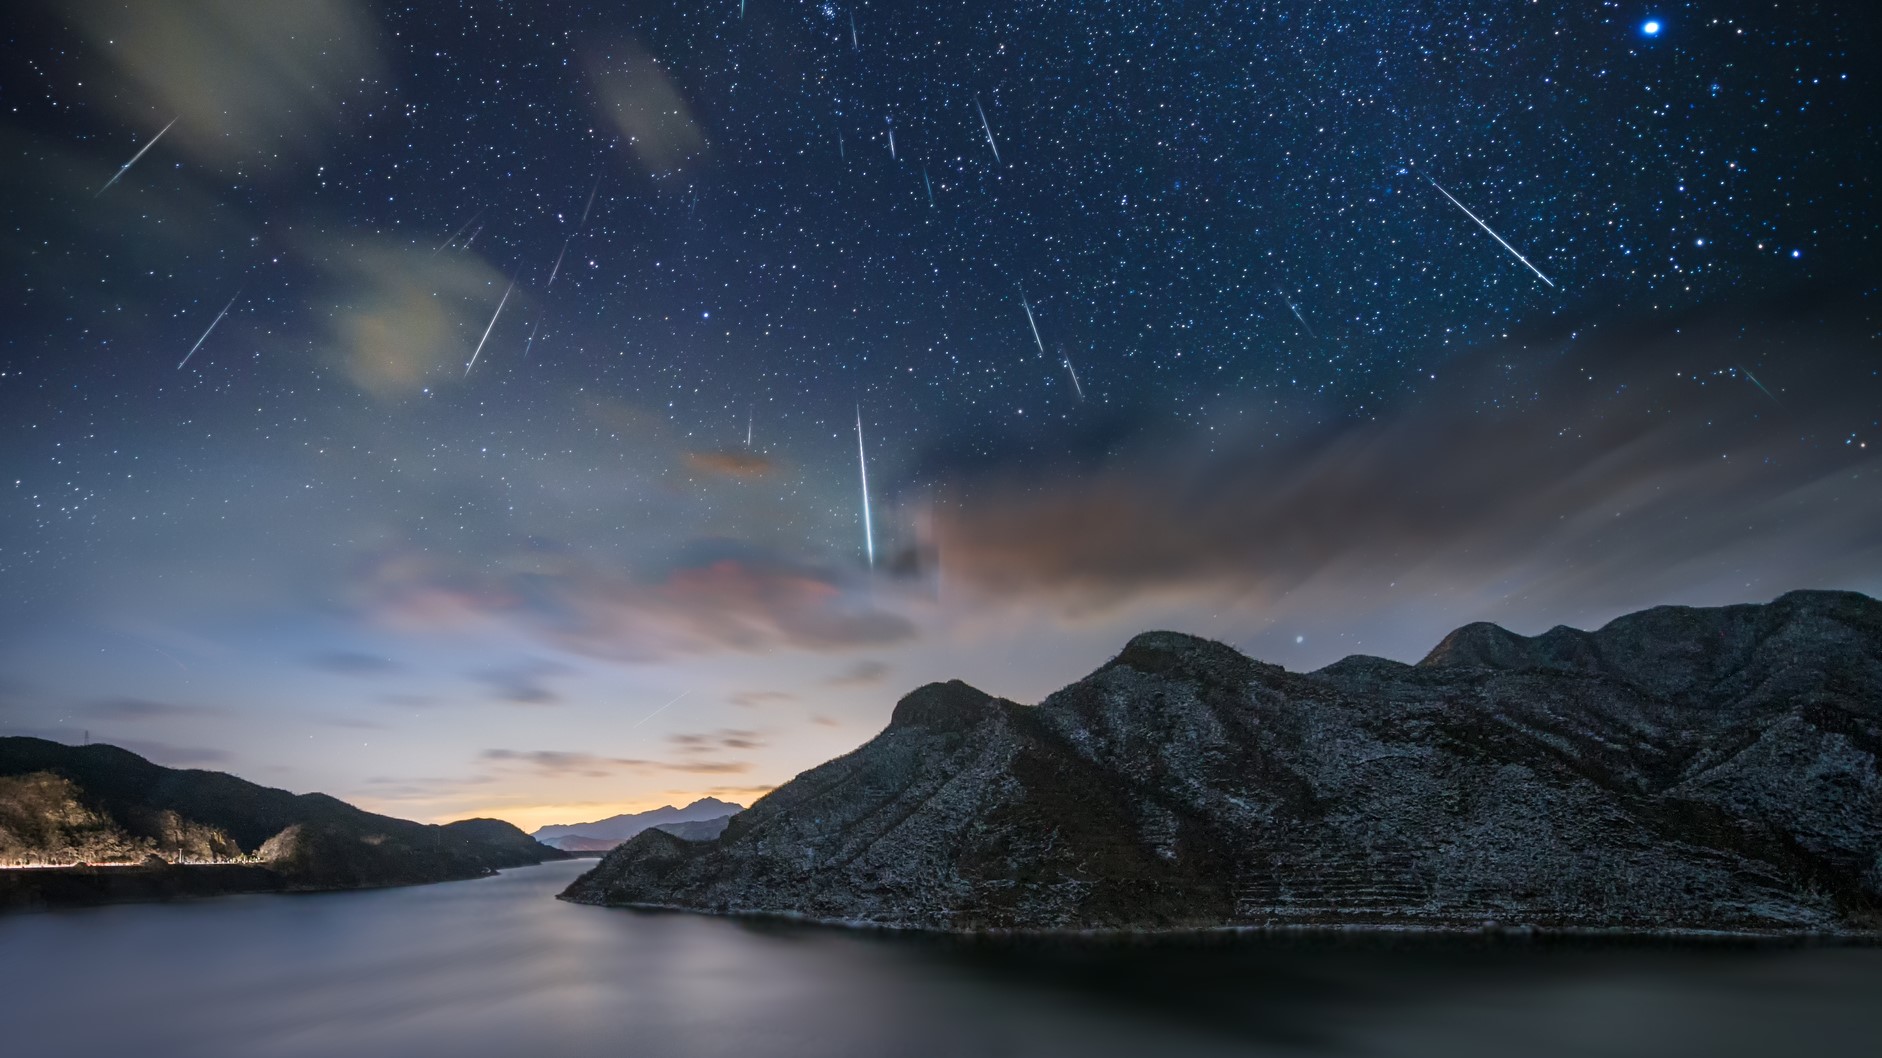 Meteor showers and shooting stars: Formation and history | Space